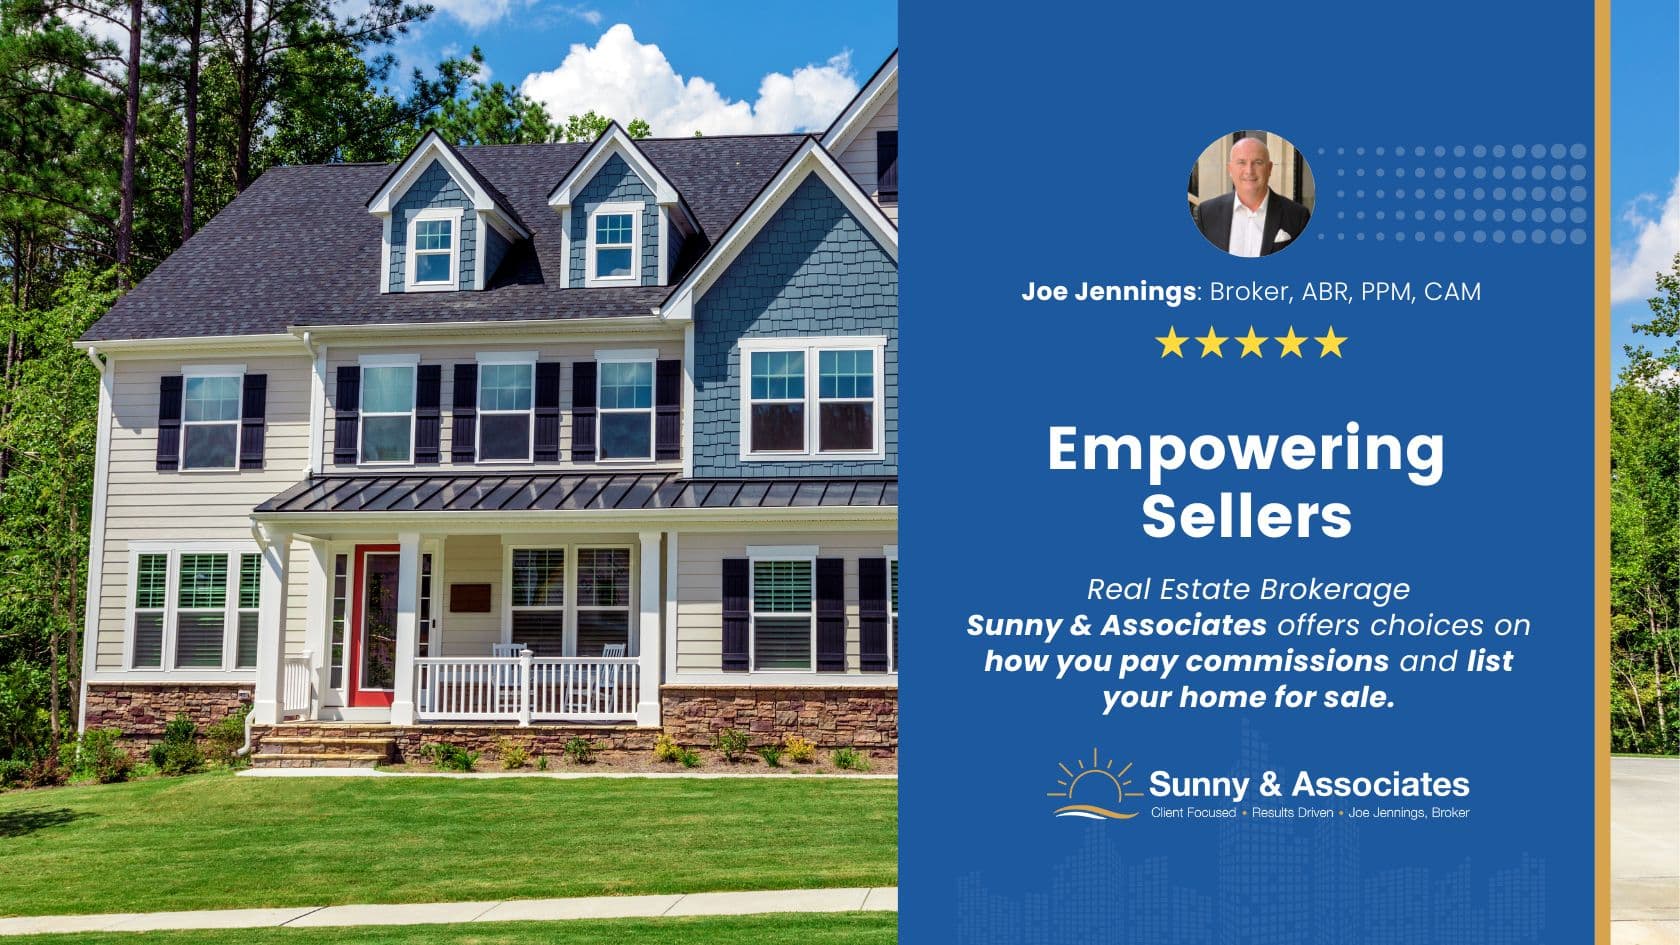 Empowering Sellers: Real Estate Brokerage Sunny & Associates Offers Choices on how you pay commissions and list your home for sale